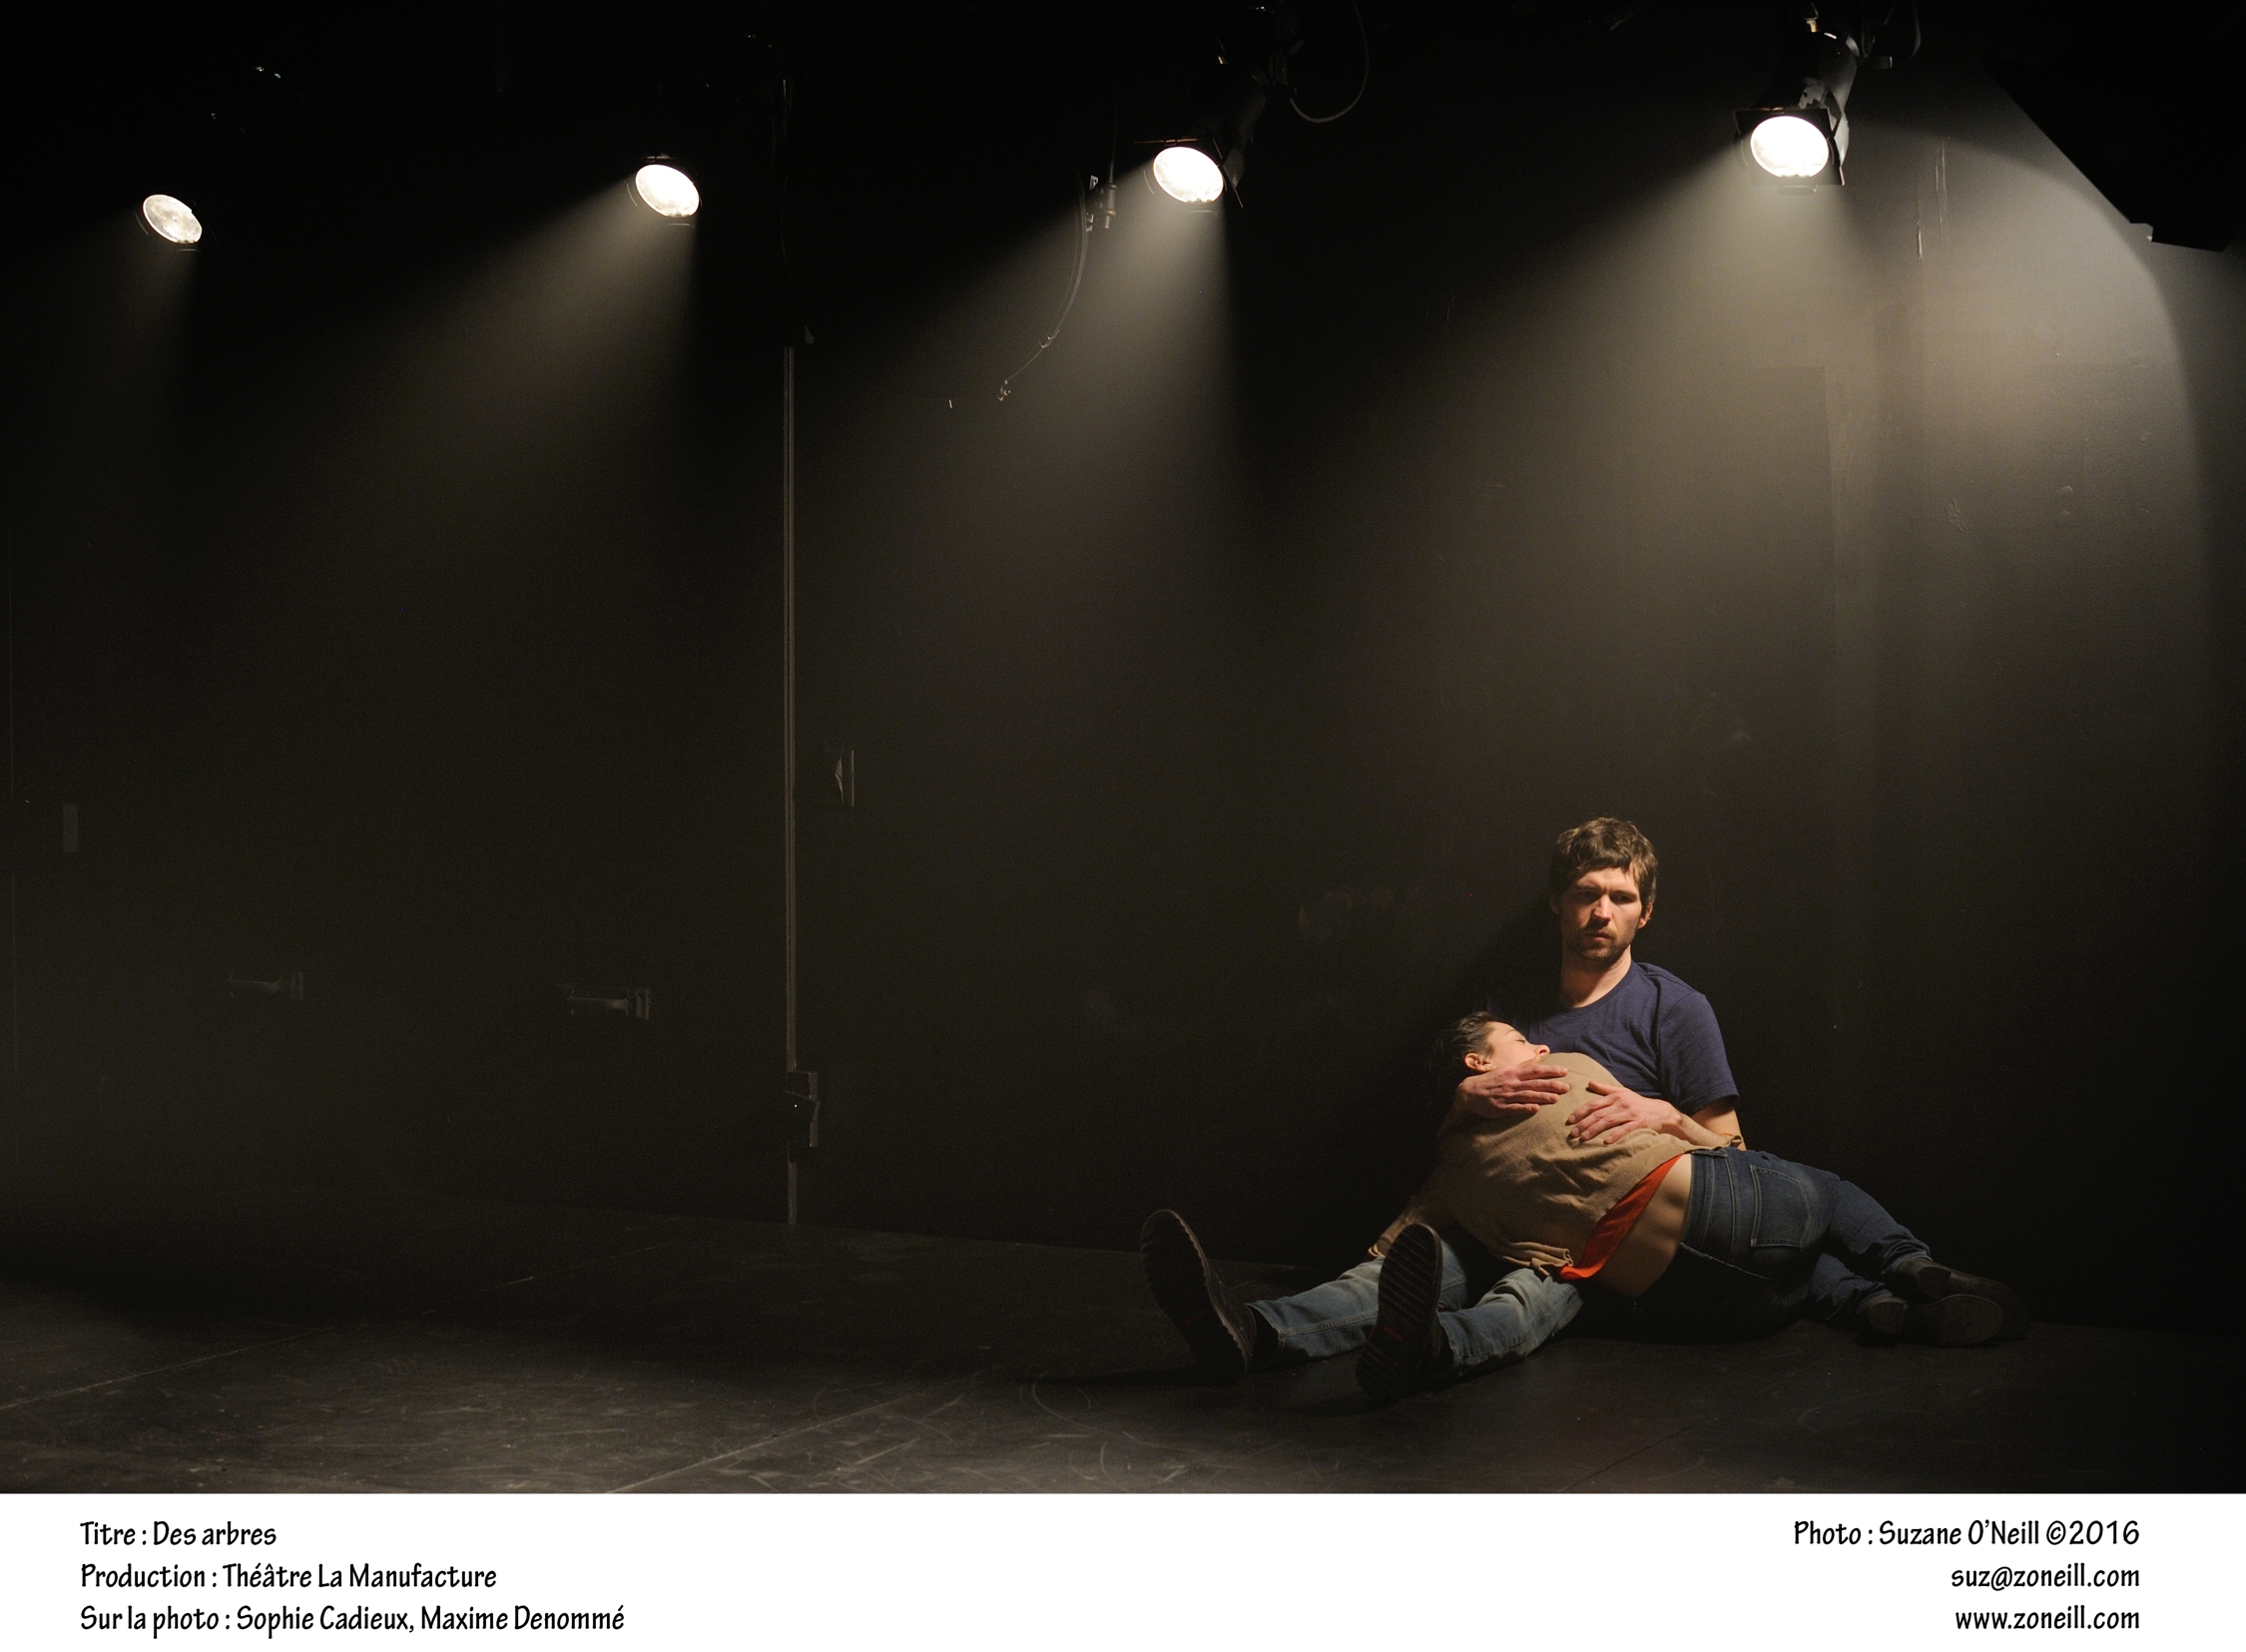 Lungs is a play by Duncan Macmillan that was translated into Des arbres by Benjamin Pradet. Photo by Suzane O'Neill.